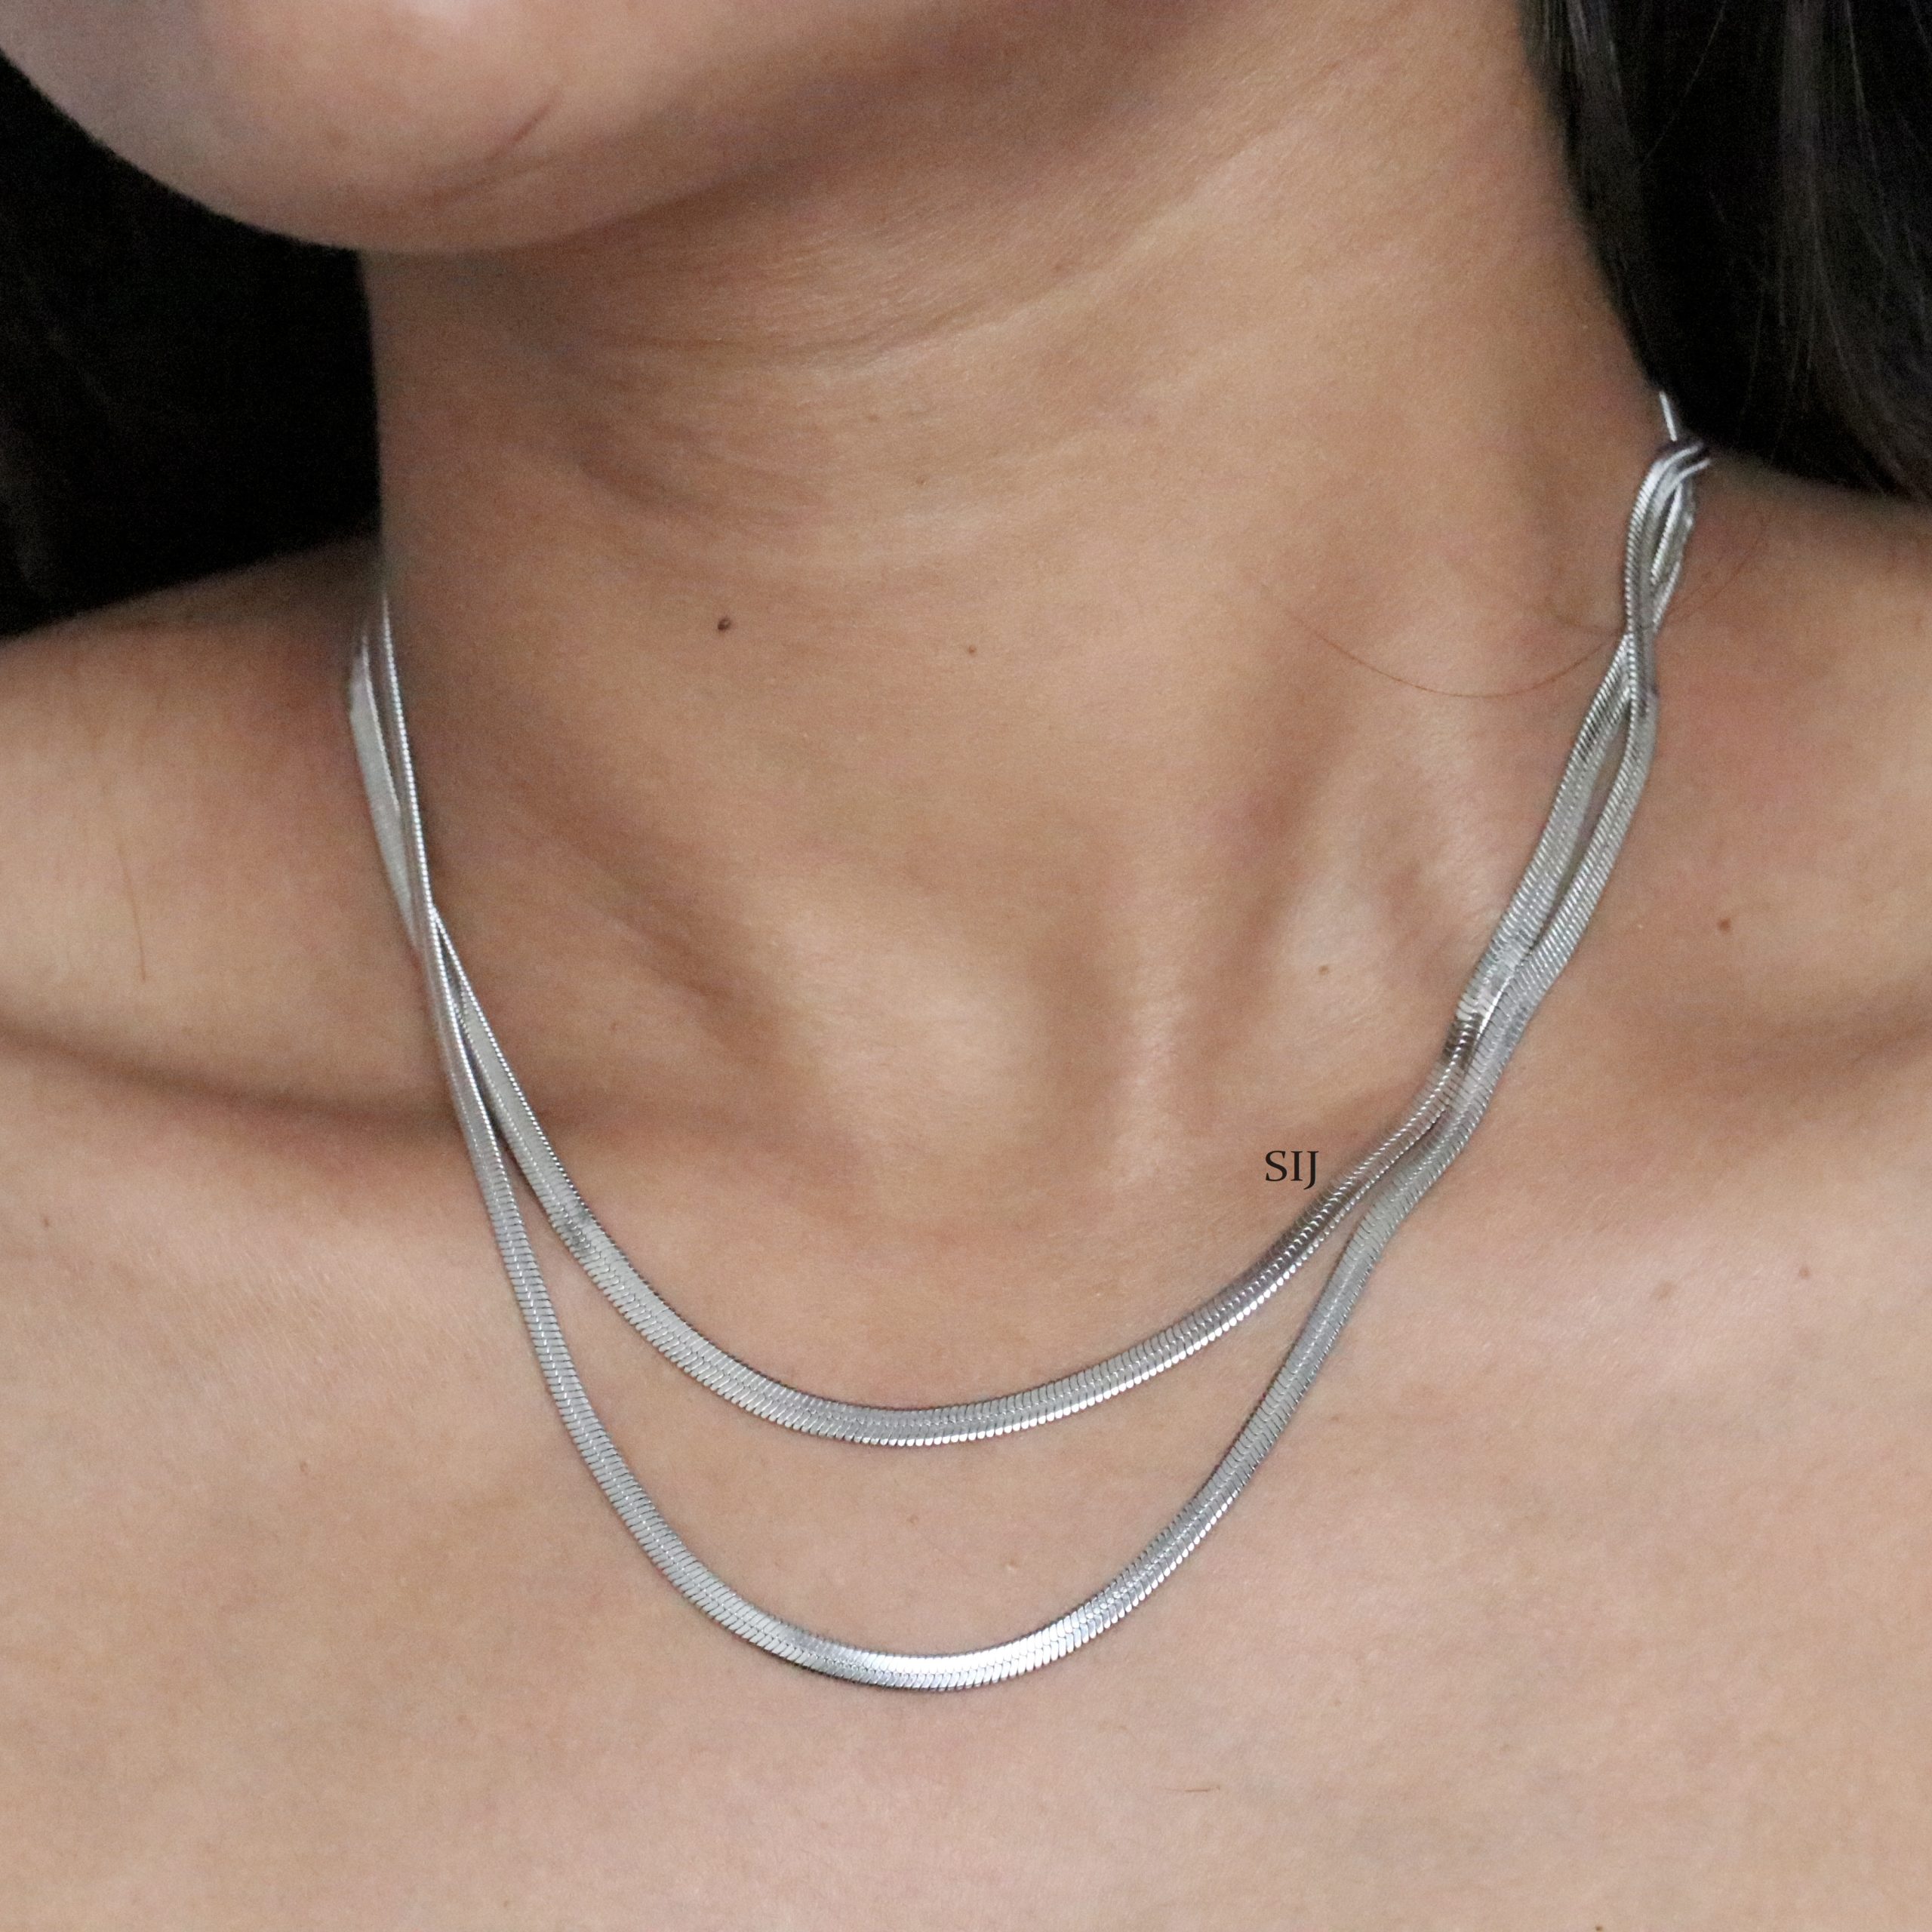 Trendy Layered Neck Chains - Silver / Gold